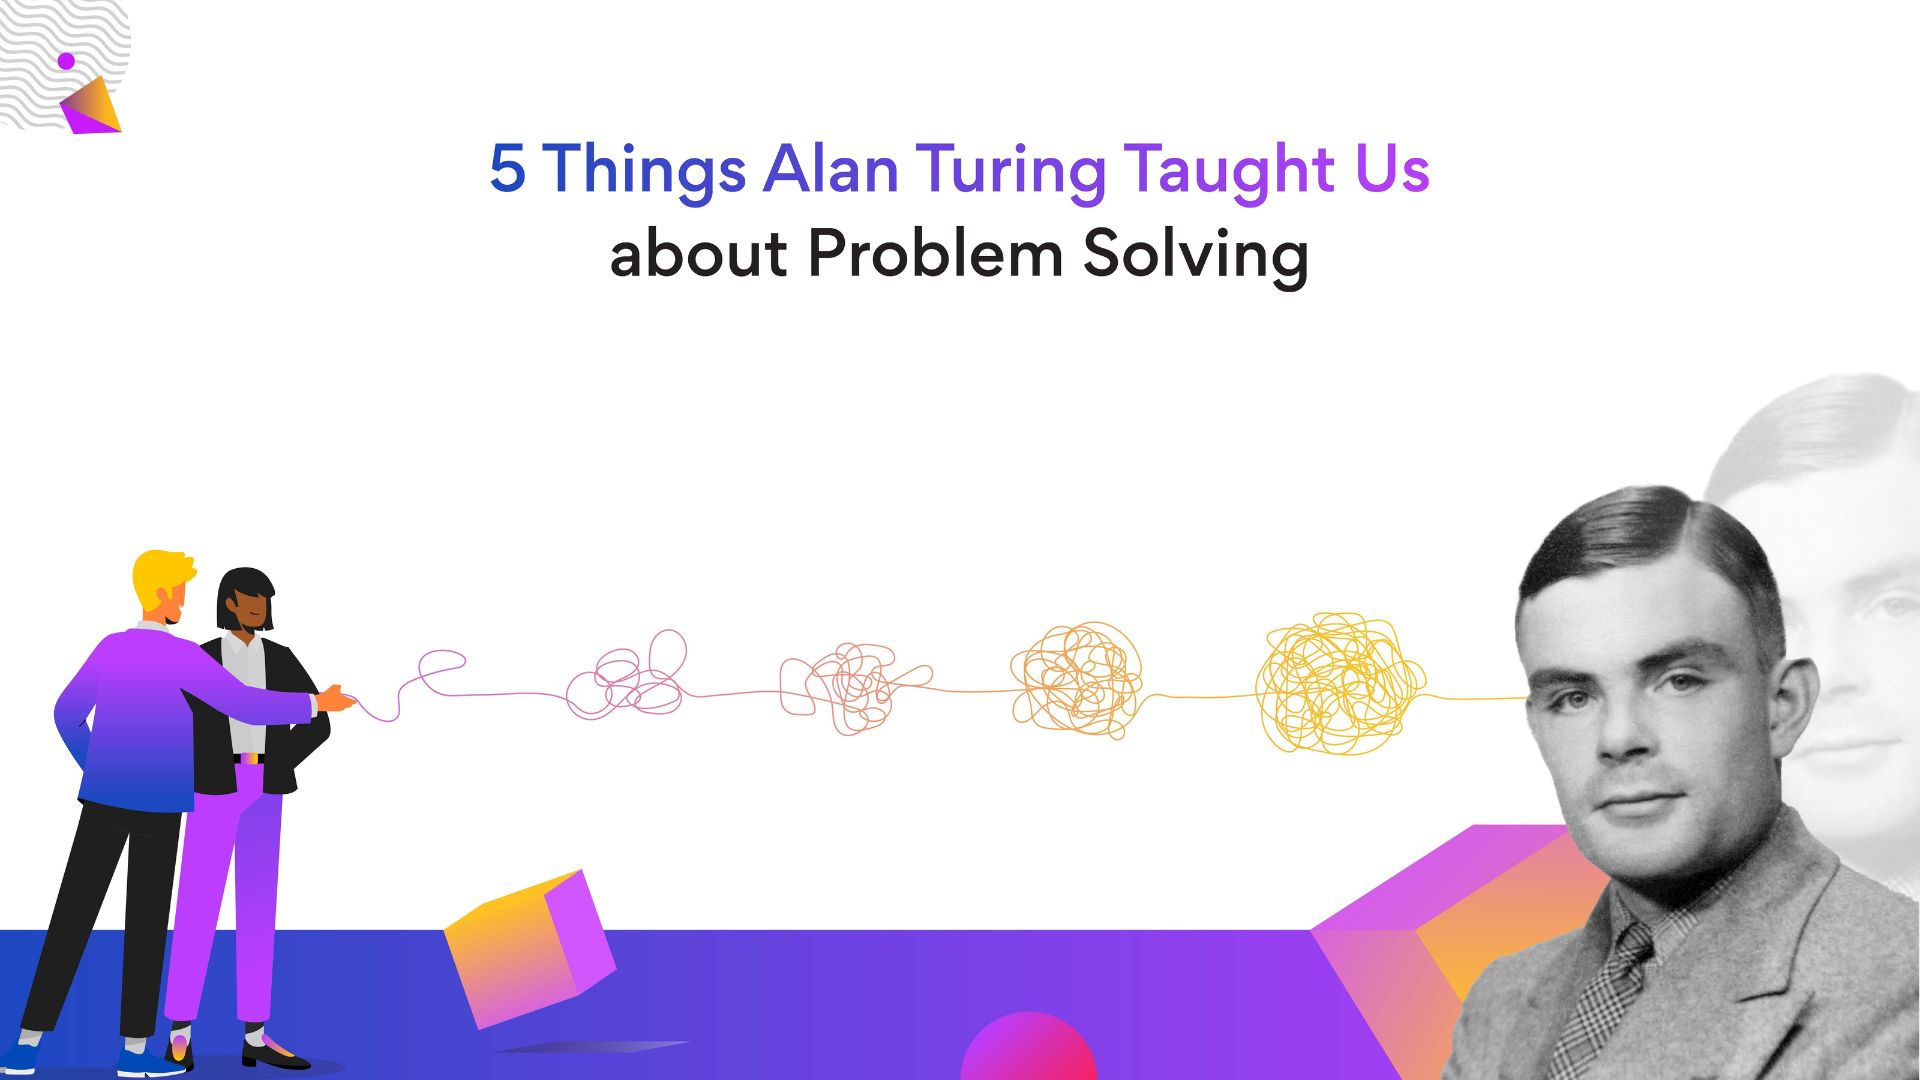 5 Problem Solving Strategies Alan Turing Taught the World